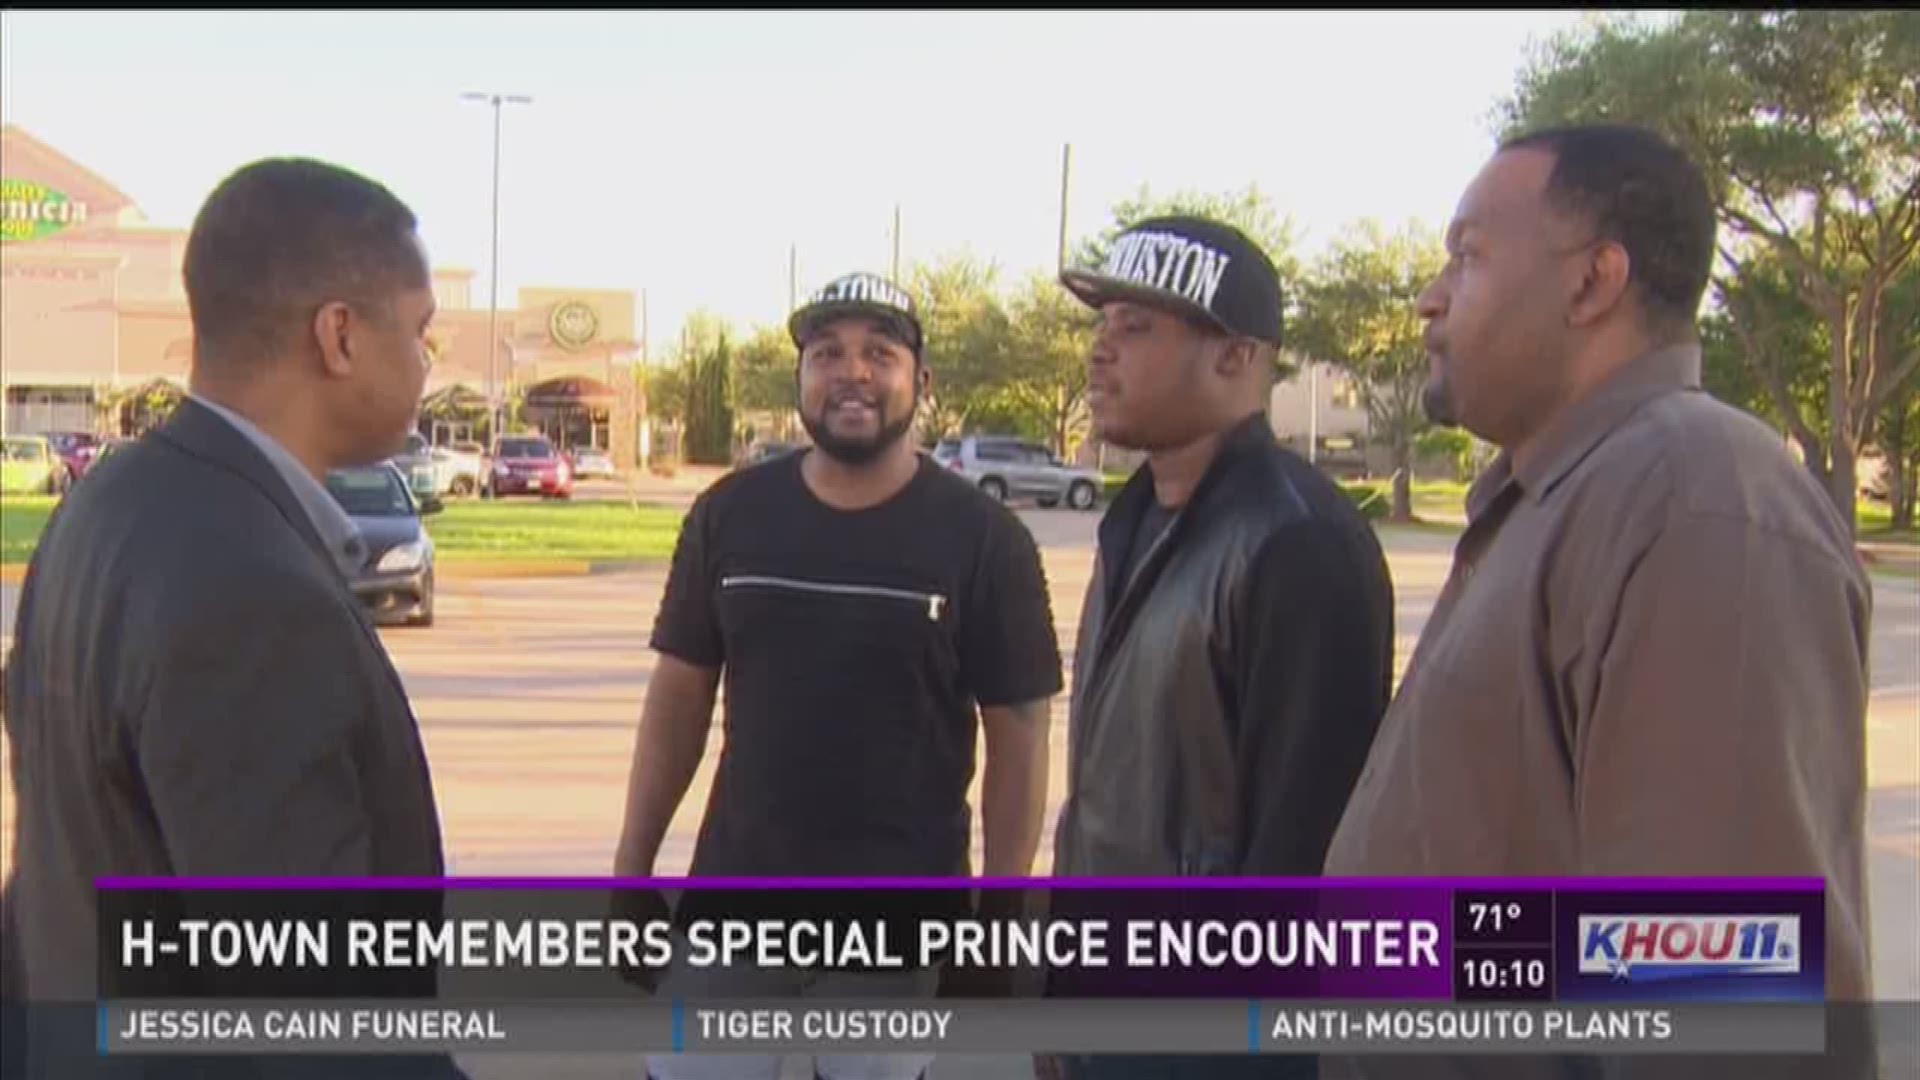 A popular Houston music group called H-Town remembers a special encounter with the late legendary musician Prince. 